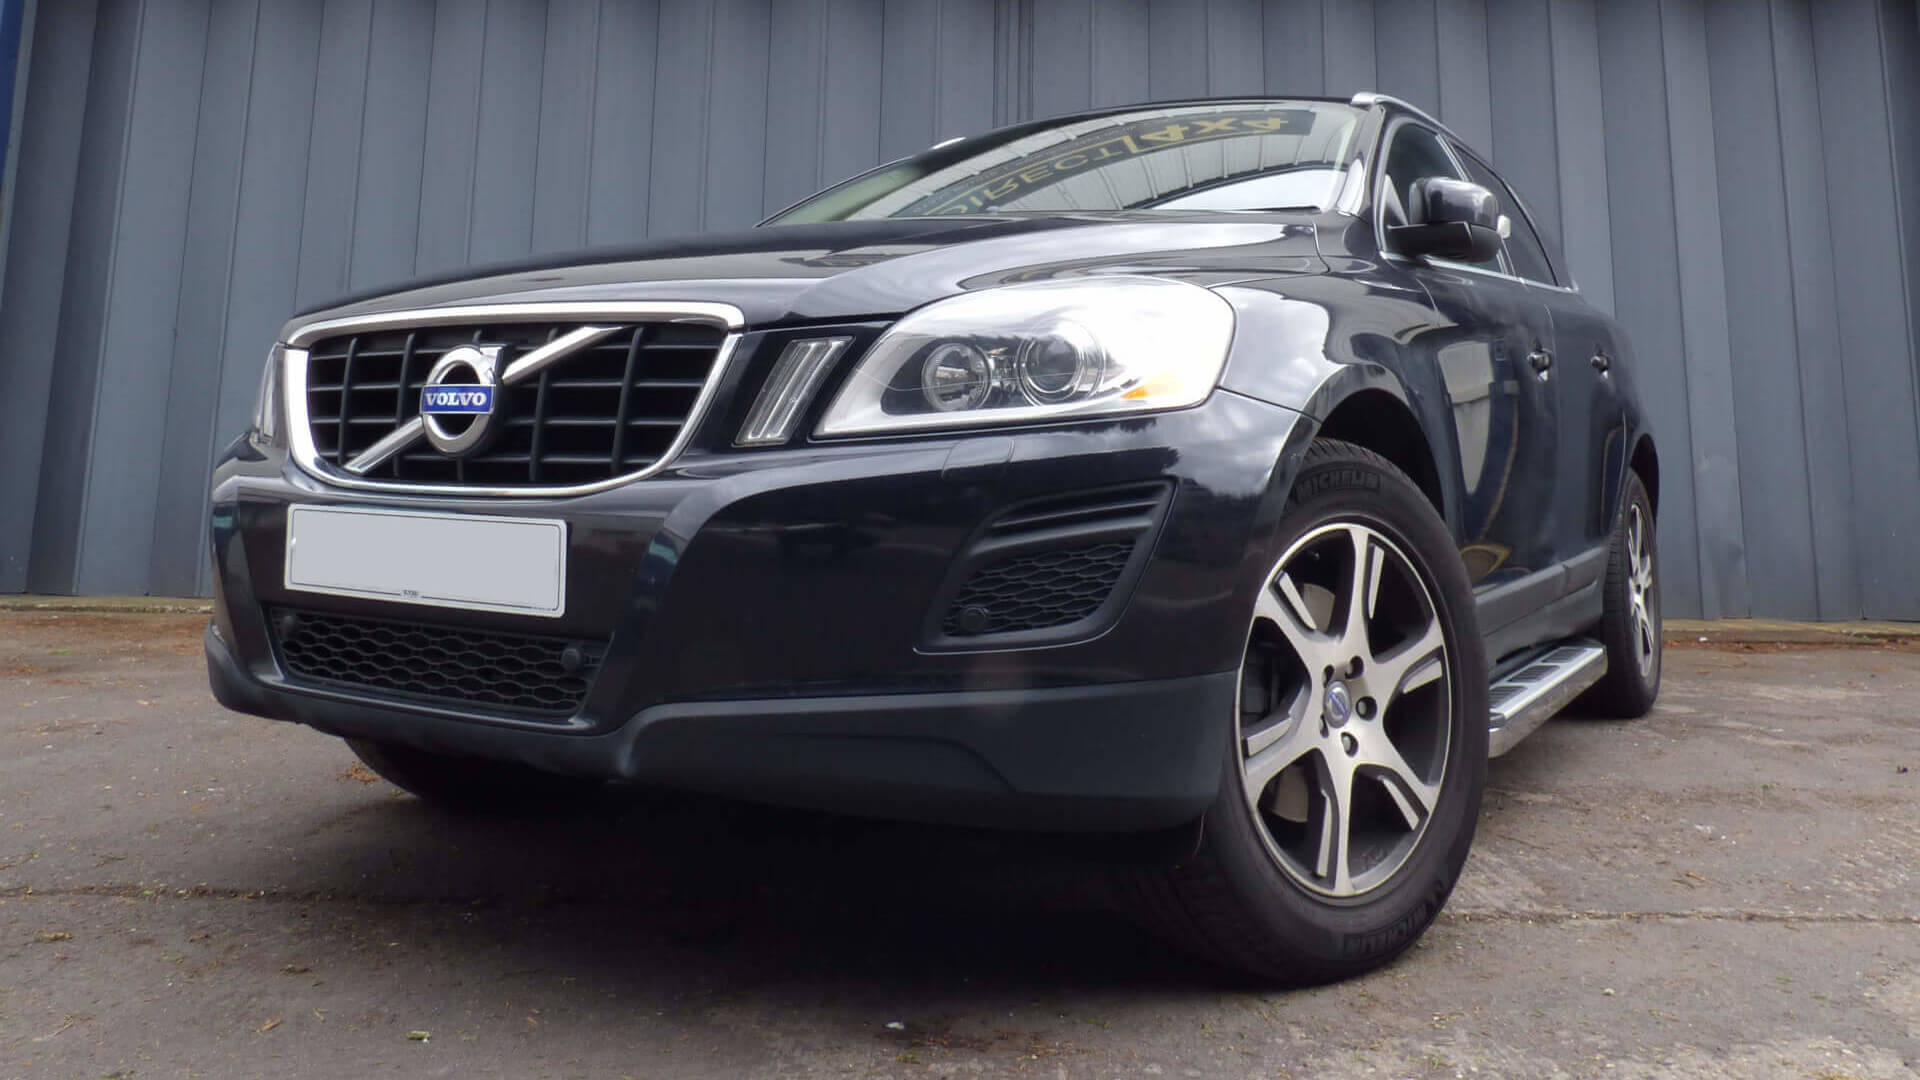 Direct4x4 Accessories for Volvo Vehicles